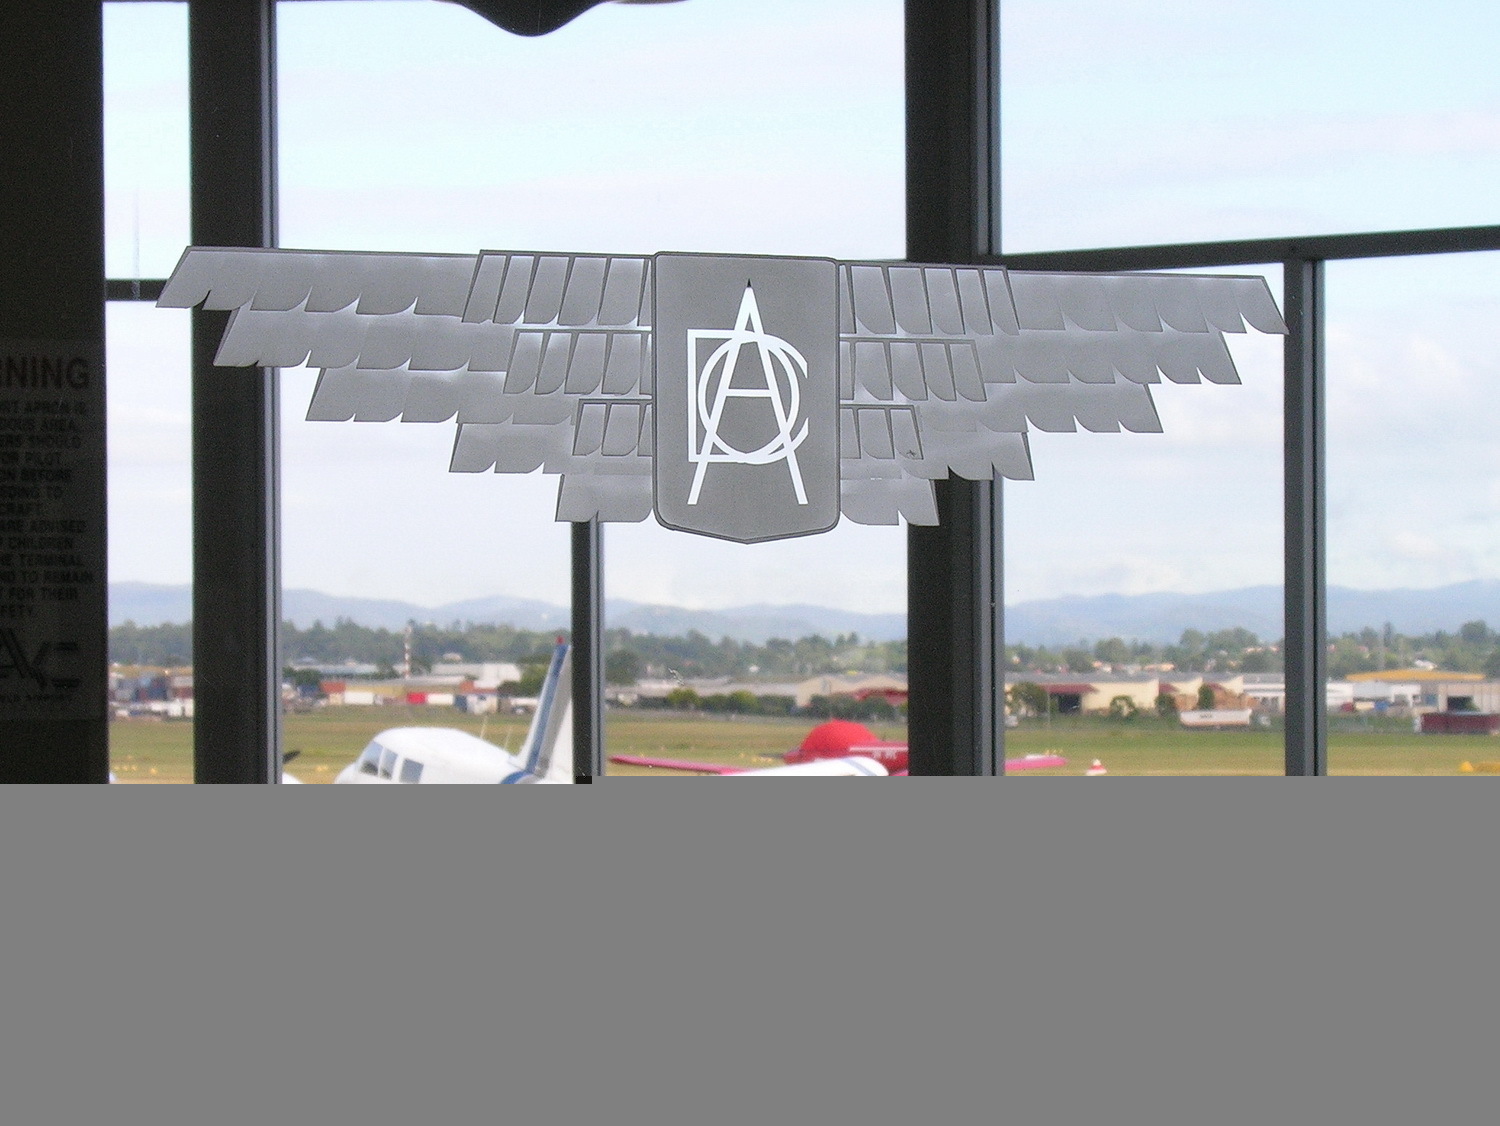 Archerfield Airport, Archerfield, Queensland Australia (YBAF) - DCA (Department of Civil Aviation) etched on the window of the waiting lounge - Archerfield Qld